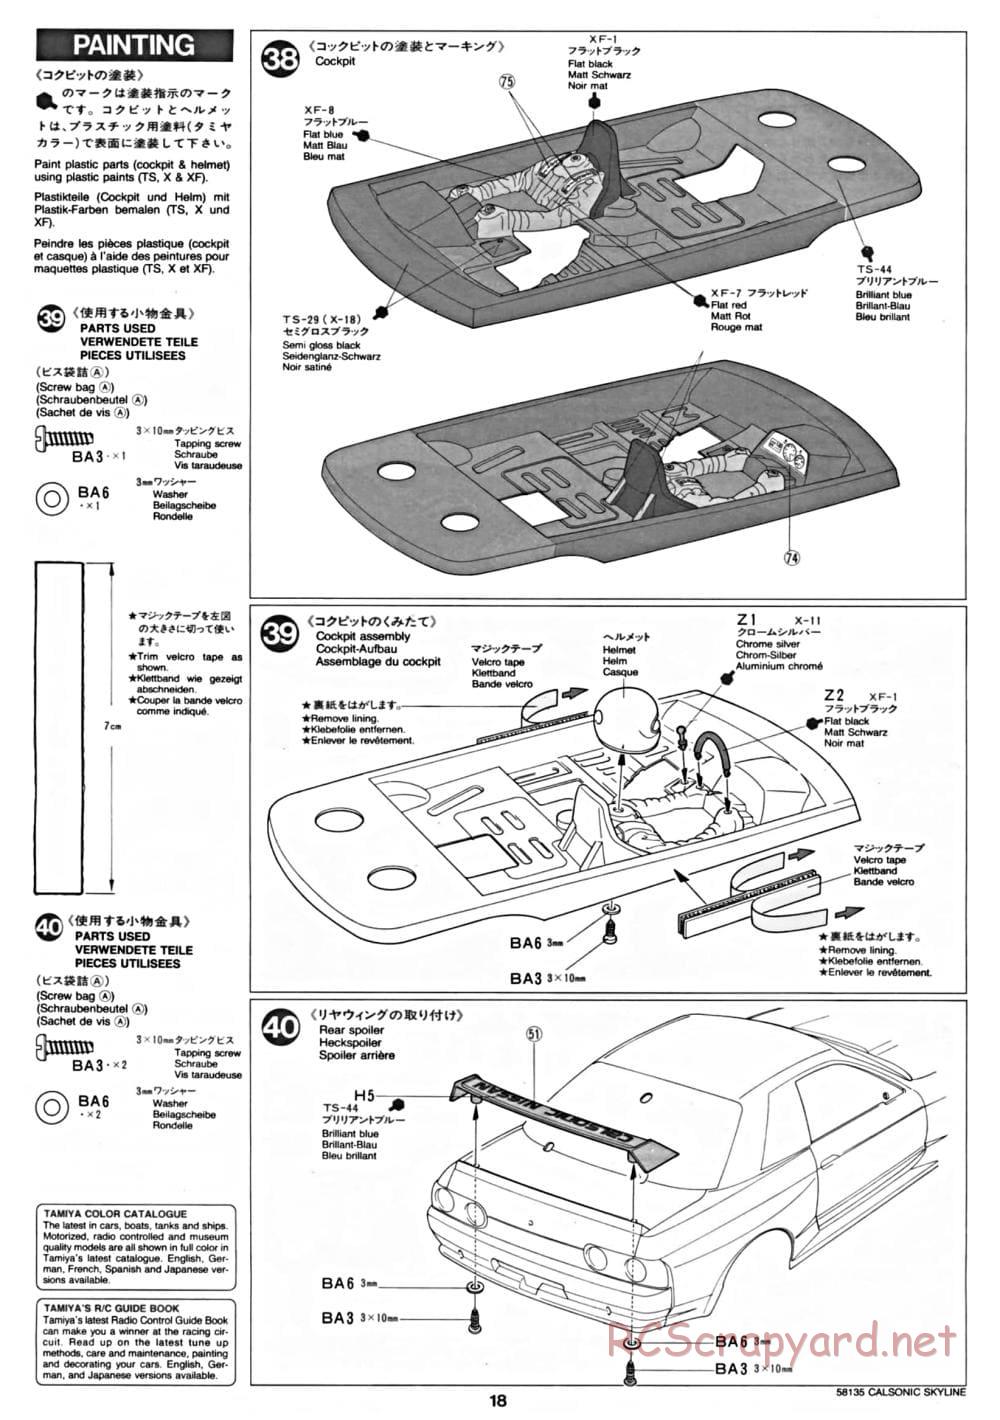 Tamiya - Calsonic Skyline GT-R Gr.A - TA-02 Chassis - Manual - Page 18